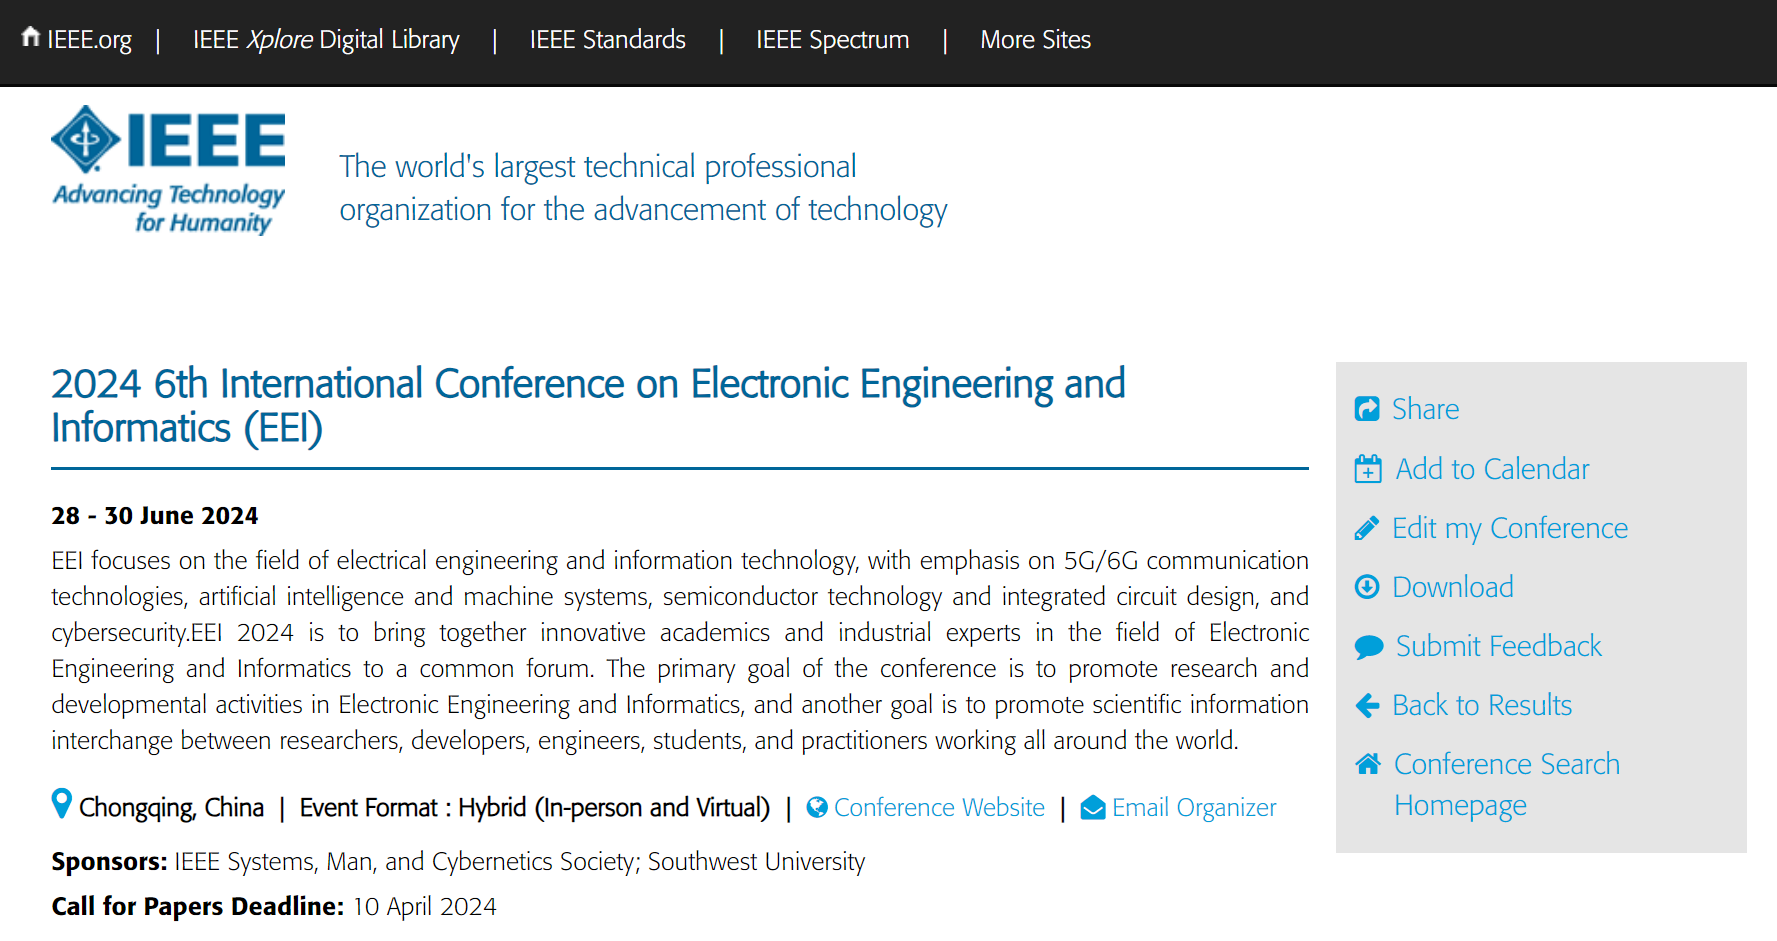 2024 6th International Conference on Electronic Engineering and